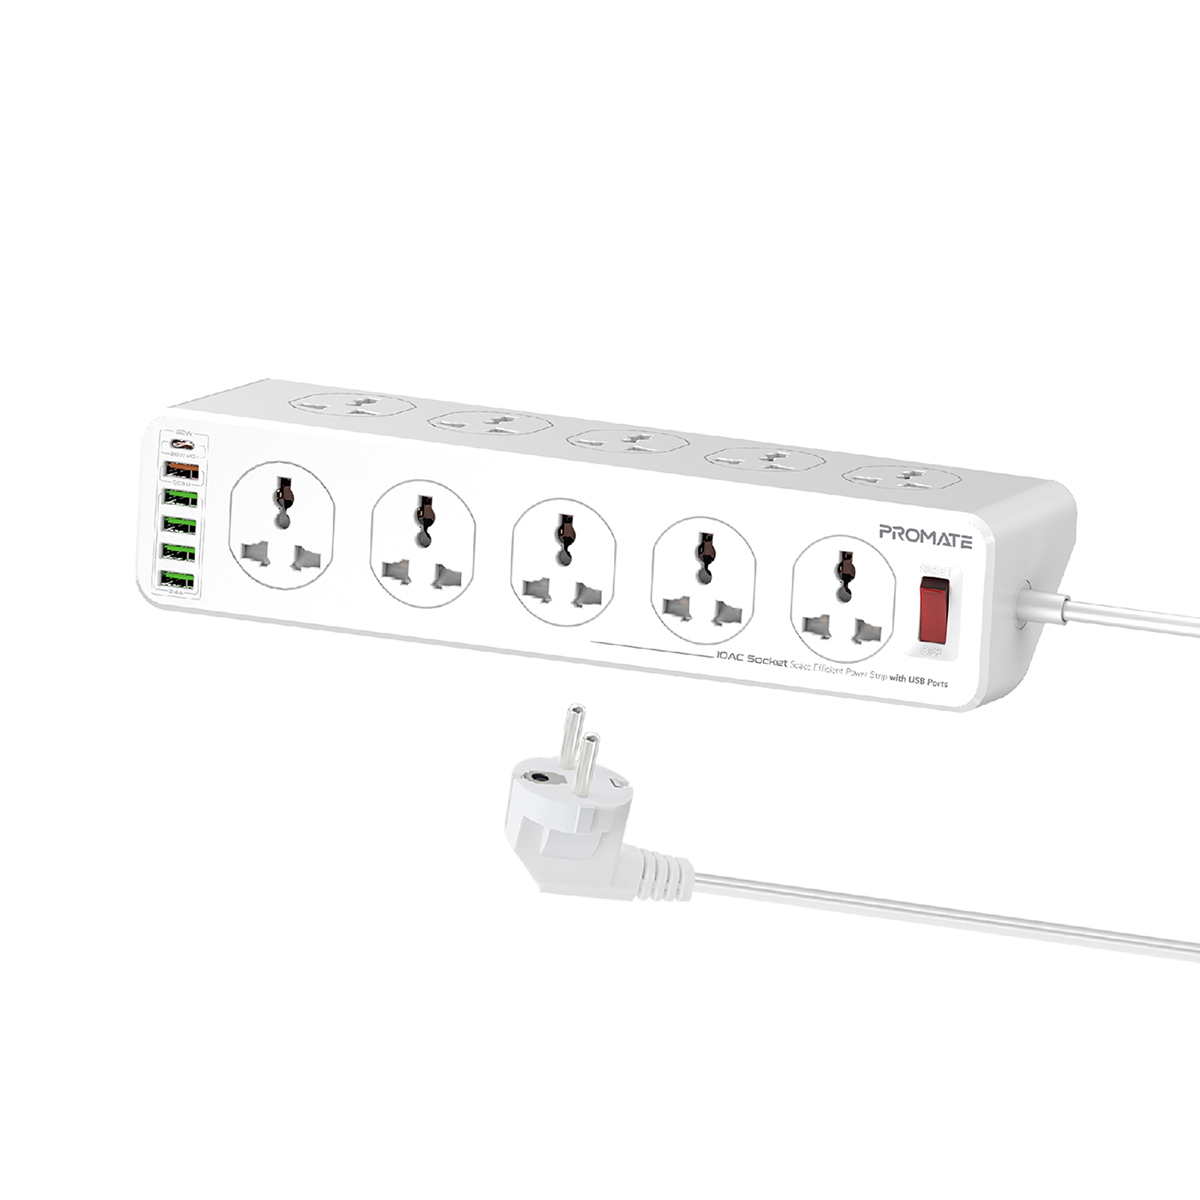 Promate Power Strip, Heavy-Duty Universal 10 Way Outlets Power Plug Extension with 20W USB-C Power Delivery Port, 18W QC 3.0 Port, 32W 4 USB Charging Ports and 3M Cord Length for iPhone/Appliances, PowerMatrix-3M EU Plug